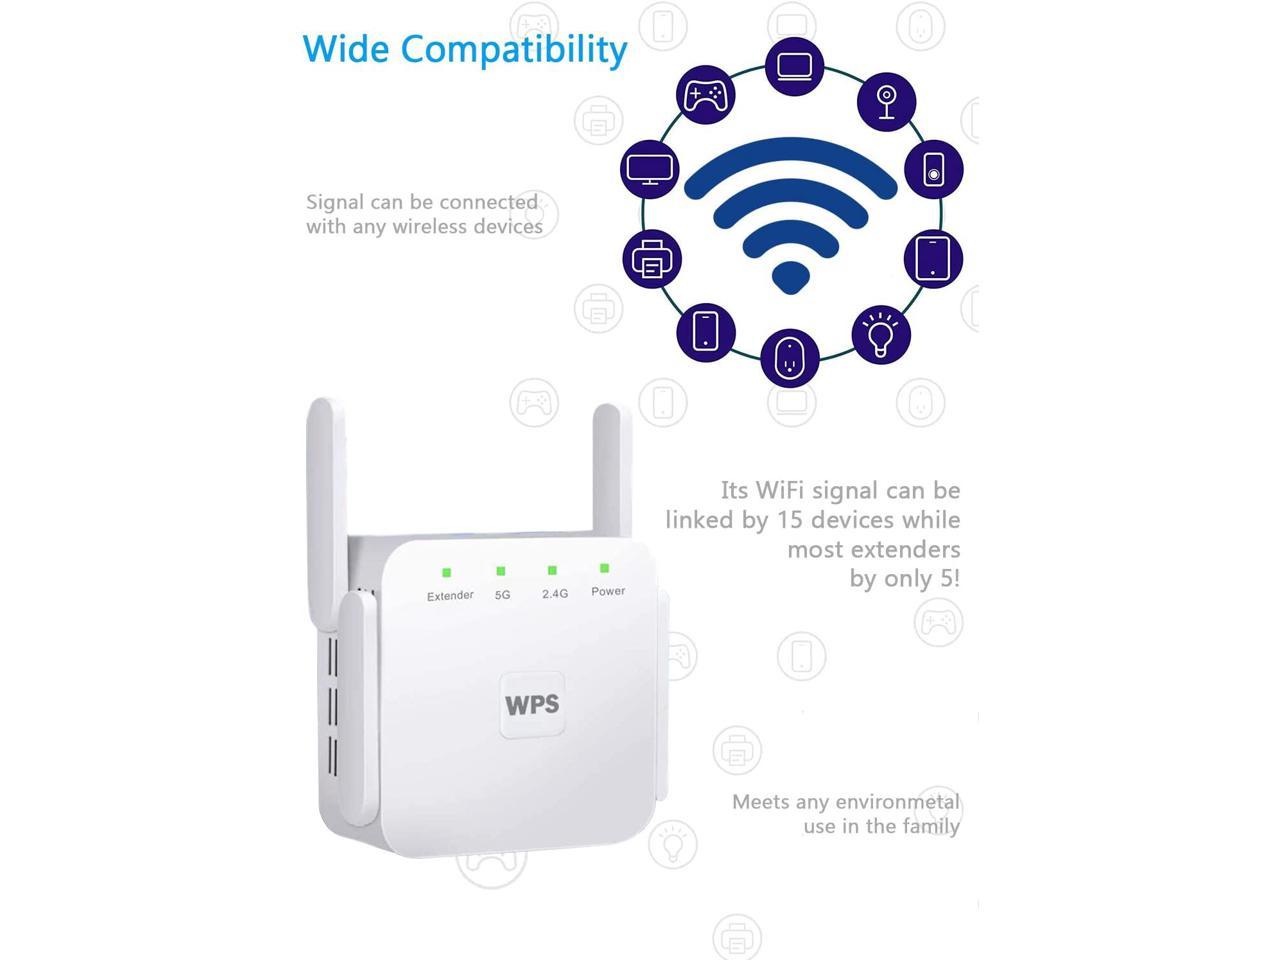 Wireless Signal Booster 2.4&5Ghz Dual Band WiFi Repeater with Ethernet Port WiFi Repeater Supports Up to 1200Mbps Speed WiFi Extender Wireless Signal Booster for Home 